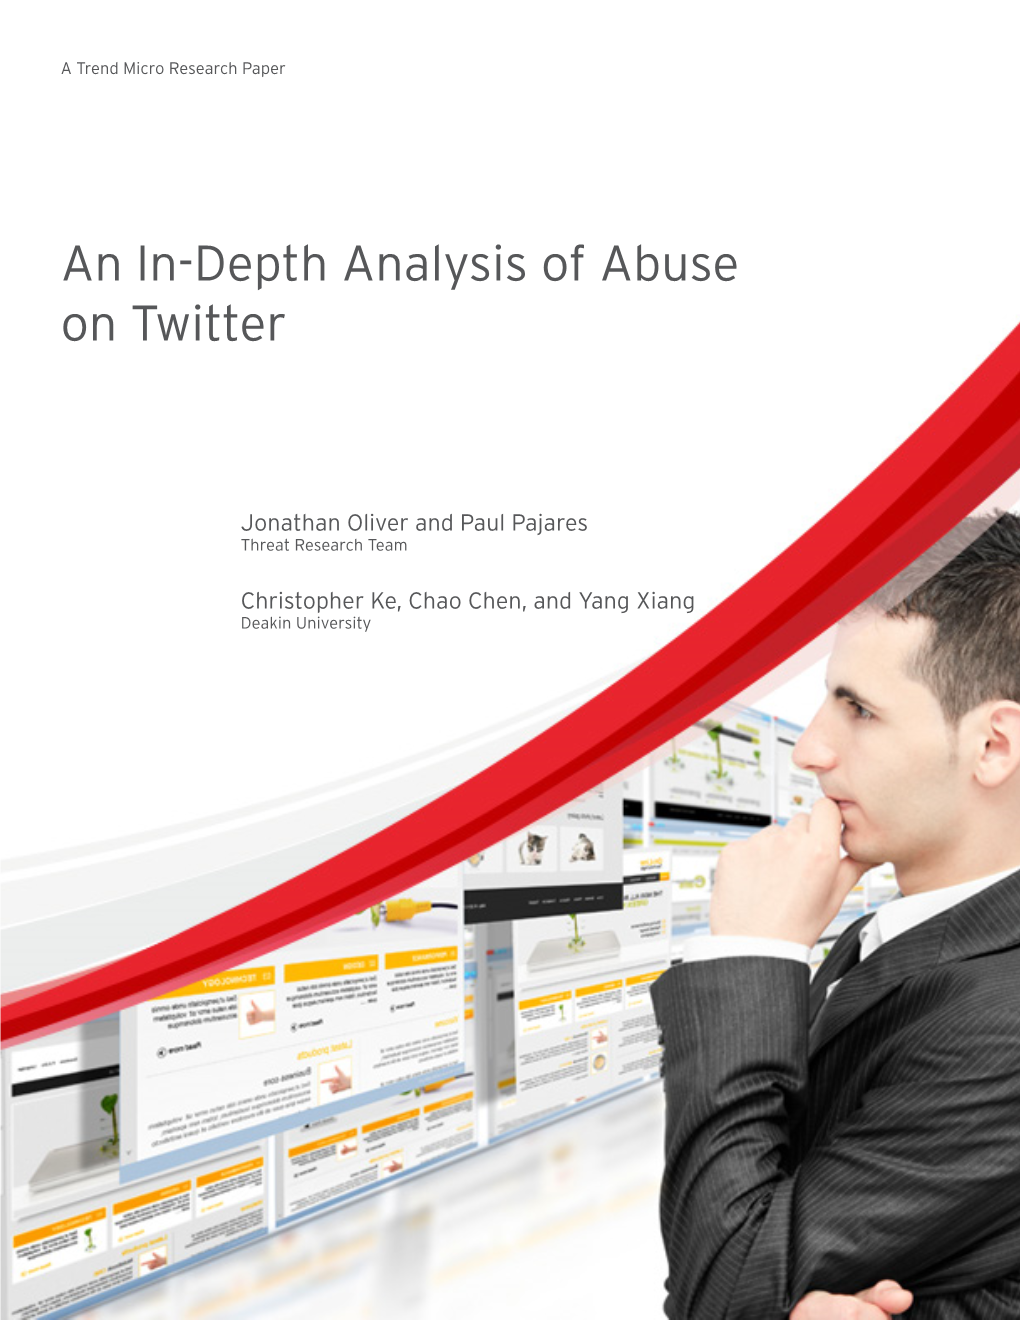 An In-Depth Analysis of Abuse on Twitter